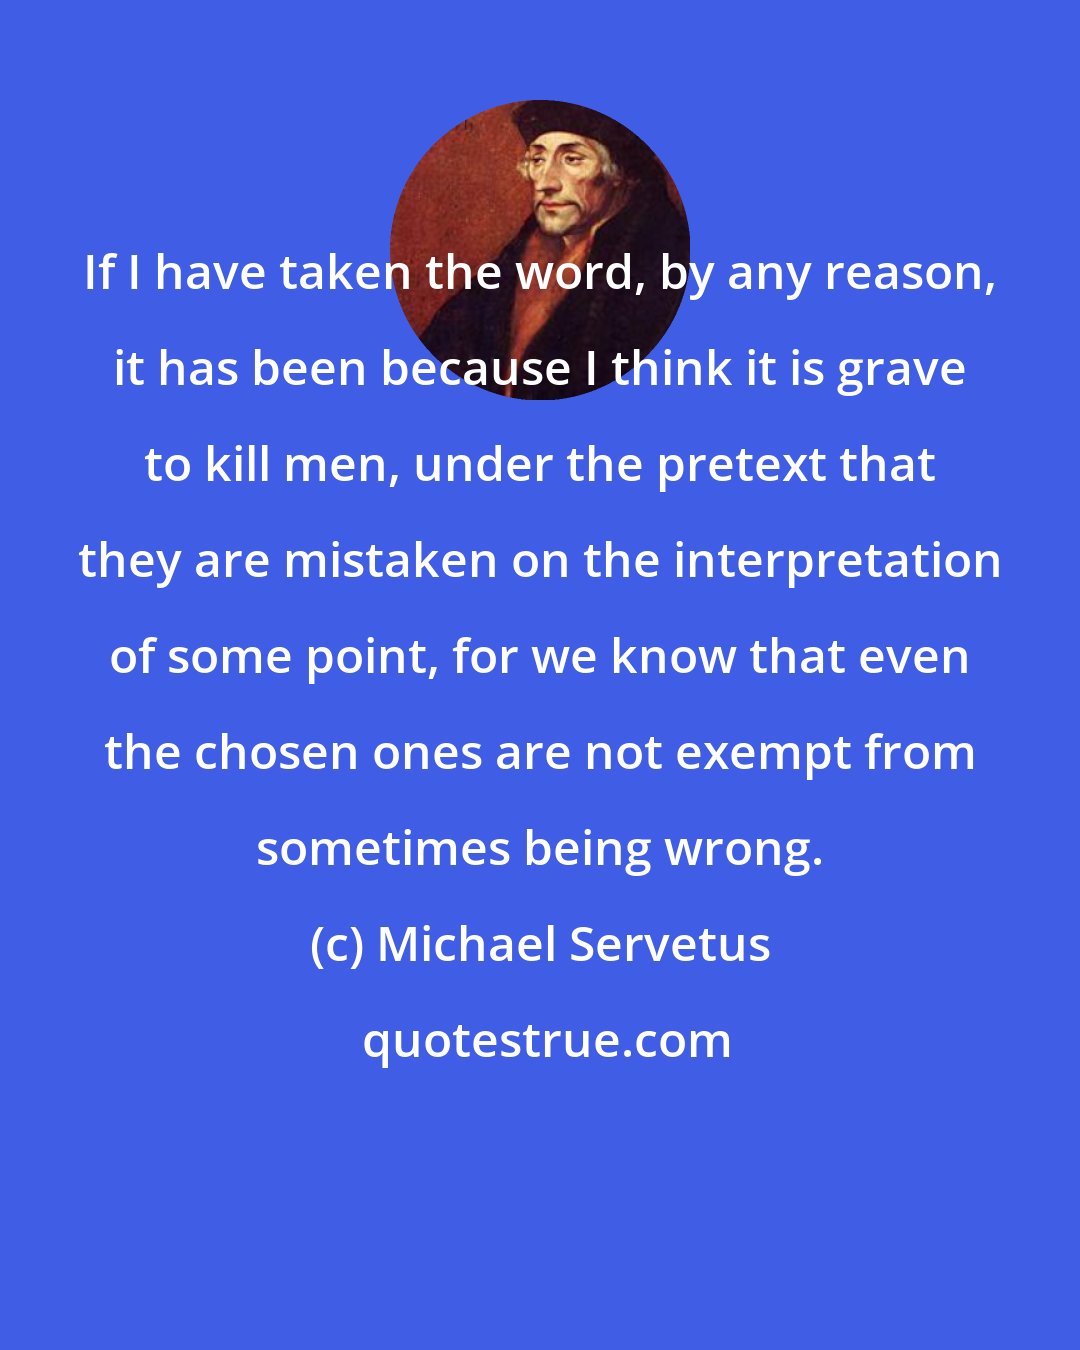 Michael Servetus: If I have taken the word, by any reason, it has been because I think it is grave to kill men, under the pretext that they are mistaken on the interpretation of some point, for we know that even the chosen ones are not exempt from sometimes being wrong.